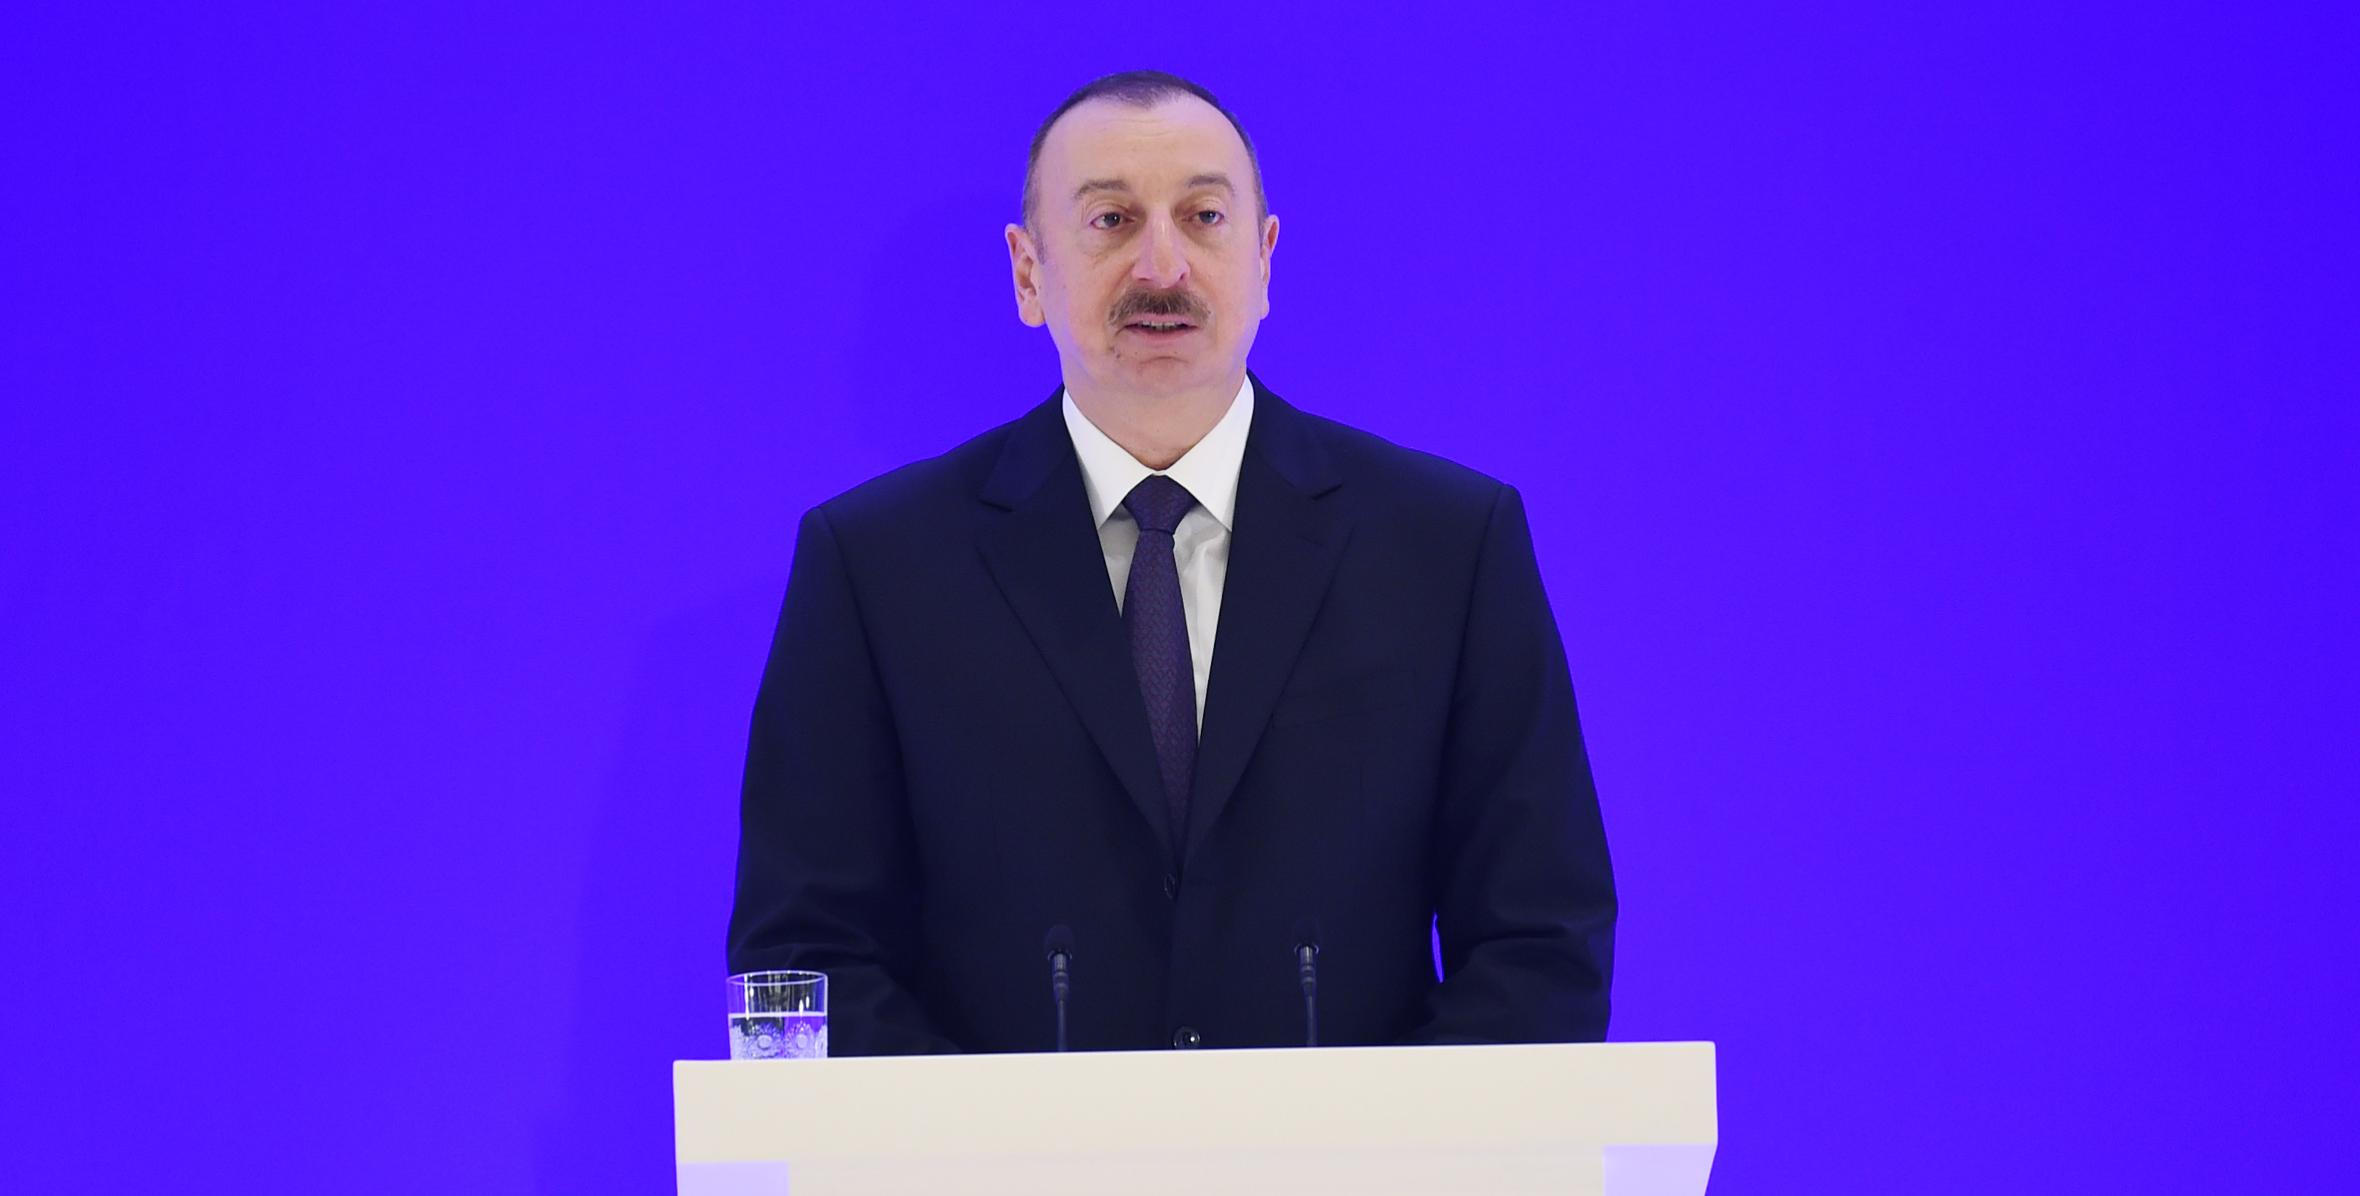 Speech by Ilham Aliyev at  the opening ceremony of the 6th Global Baku Forum